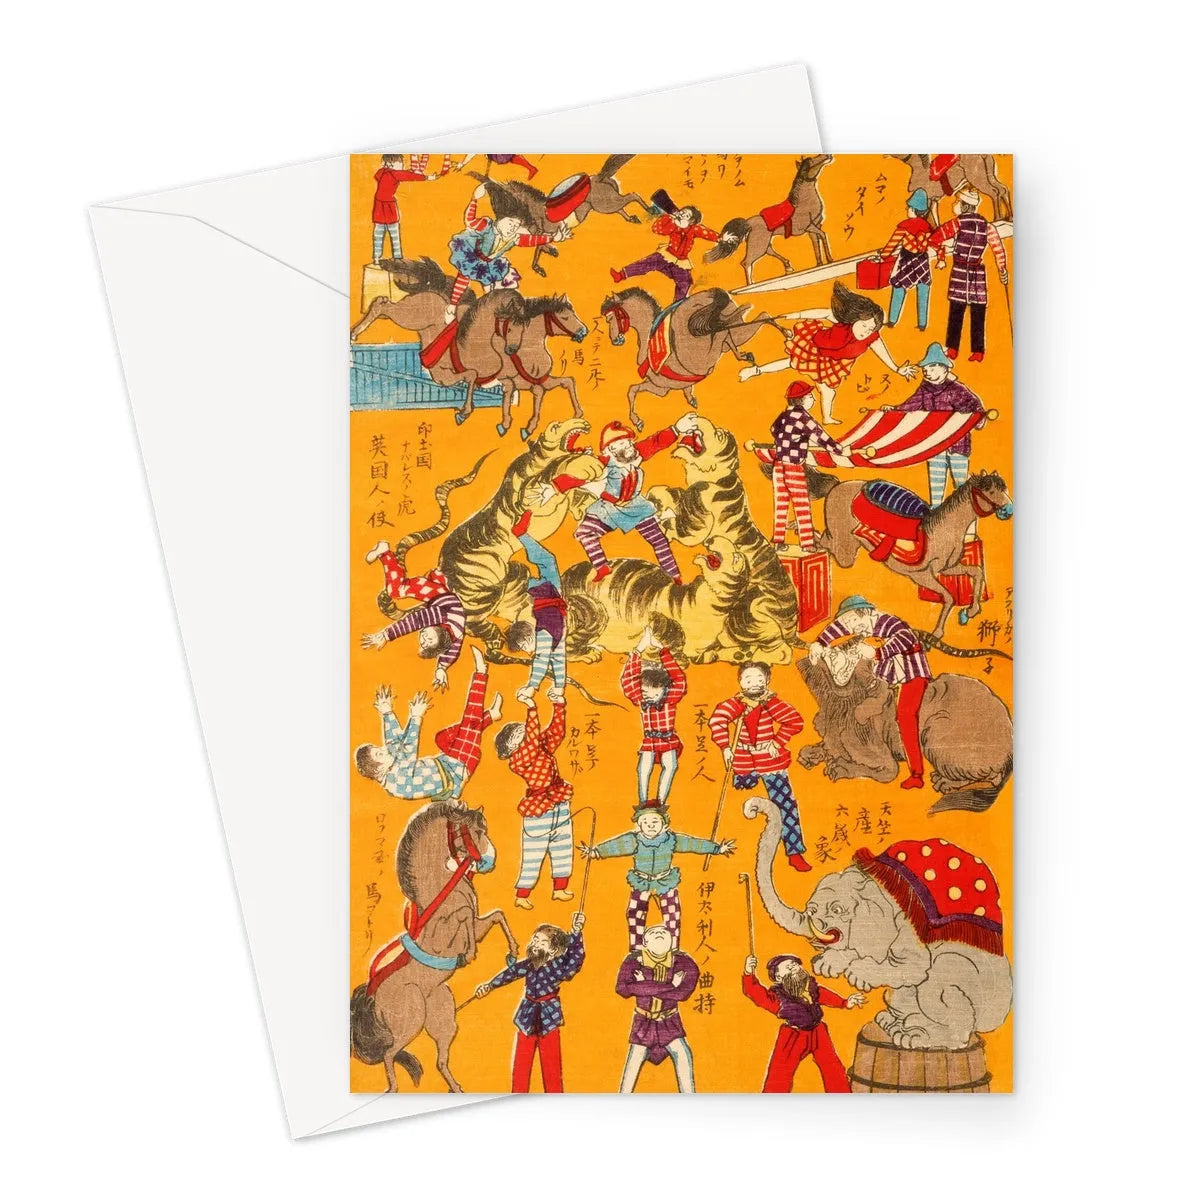 Japanese Circus Woodcut Greeting Card - A5 Portrait / 1 Card - Greeting & Note Cards - Aesthetic Art